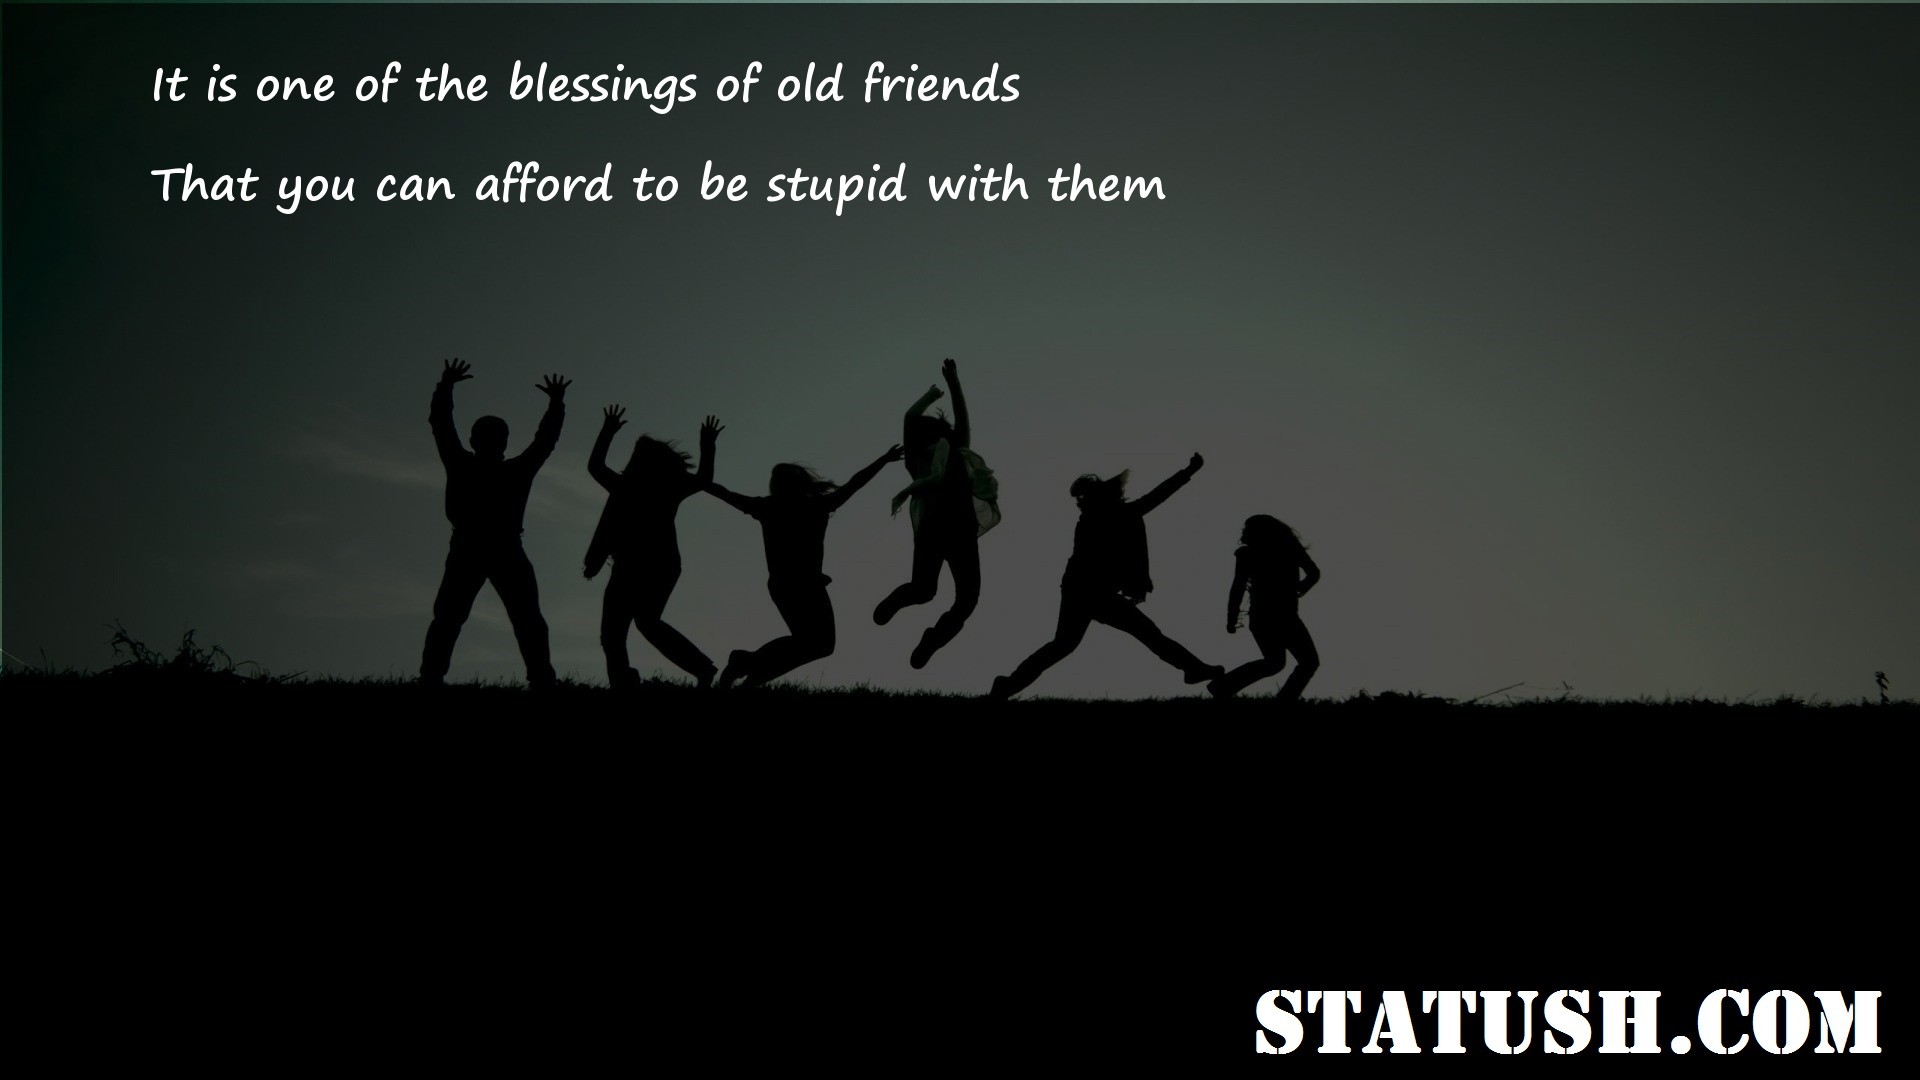 It is one of the blessings of old friends - Friendship Quotes at statush.com